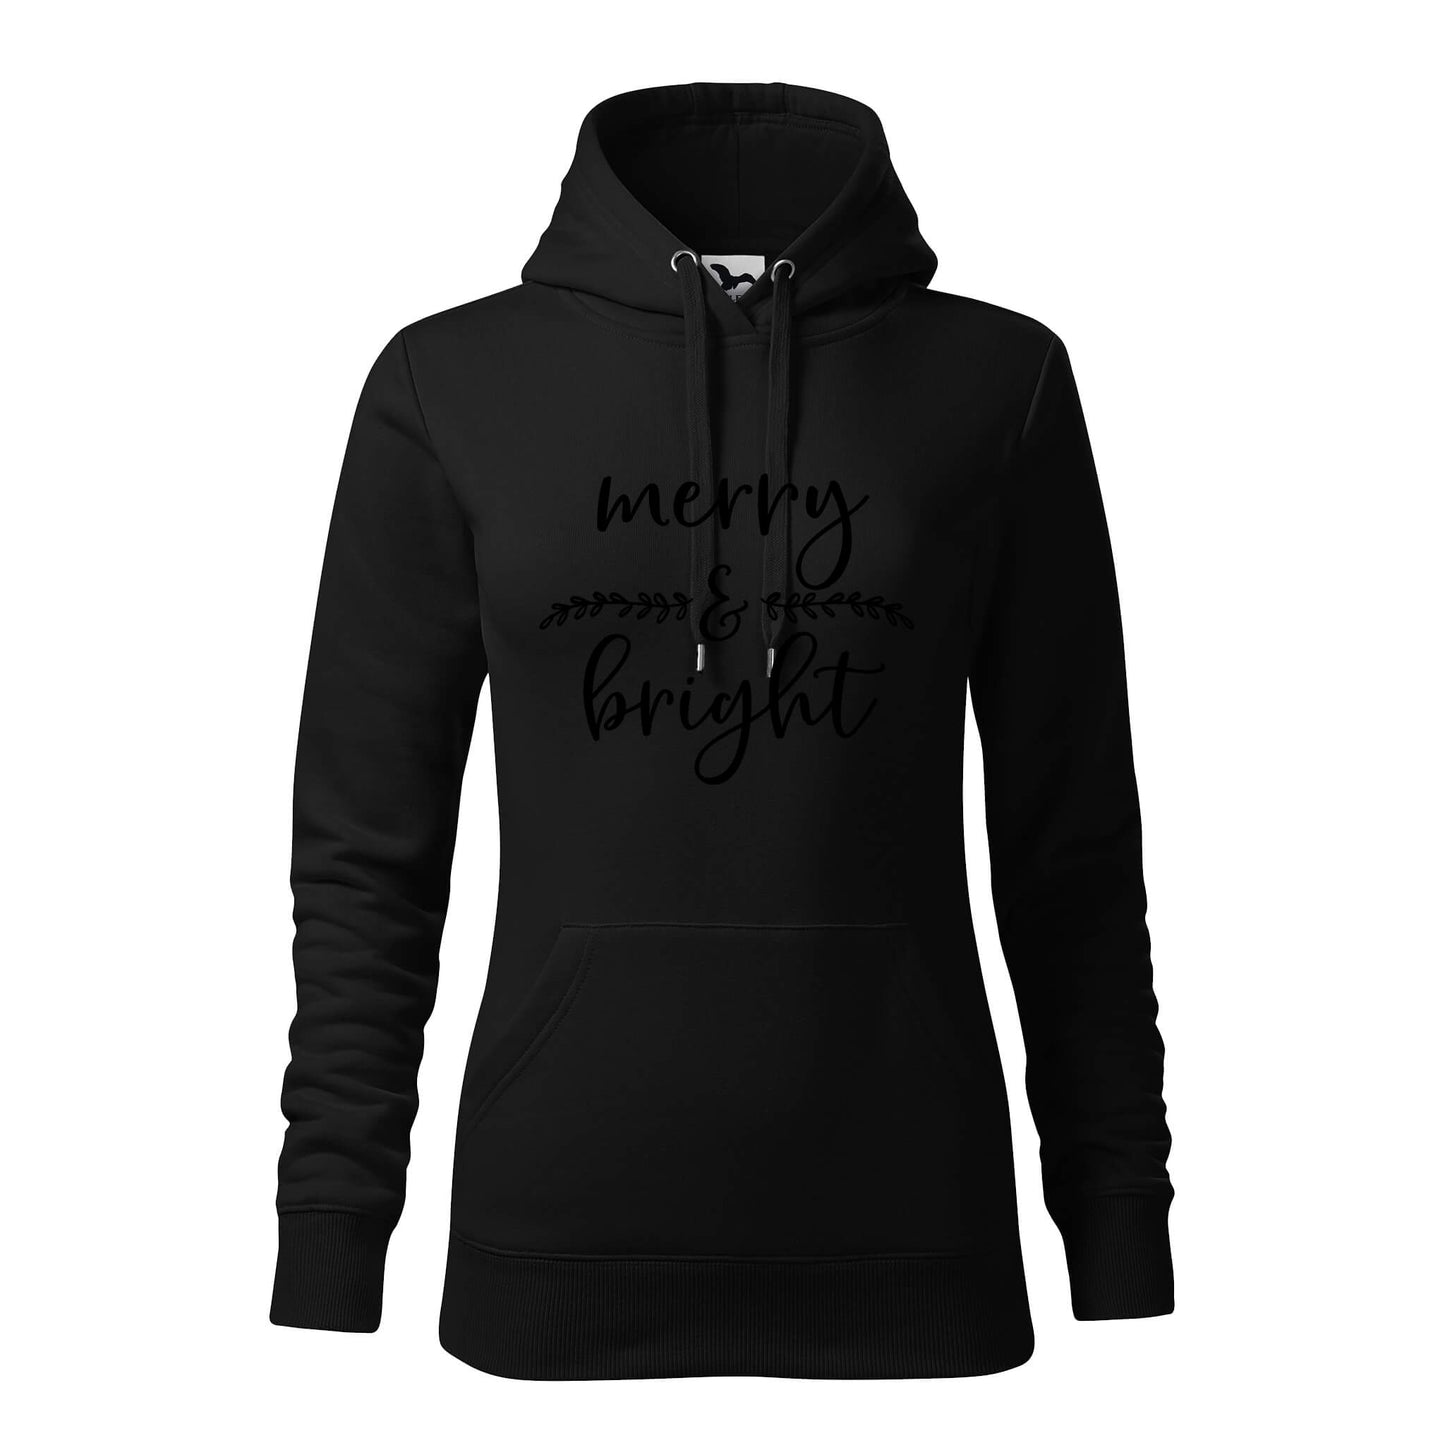 Merry and bright new hoodie - rvdesignprint